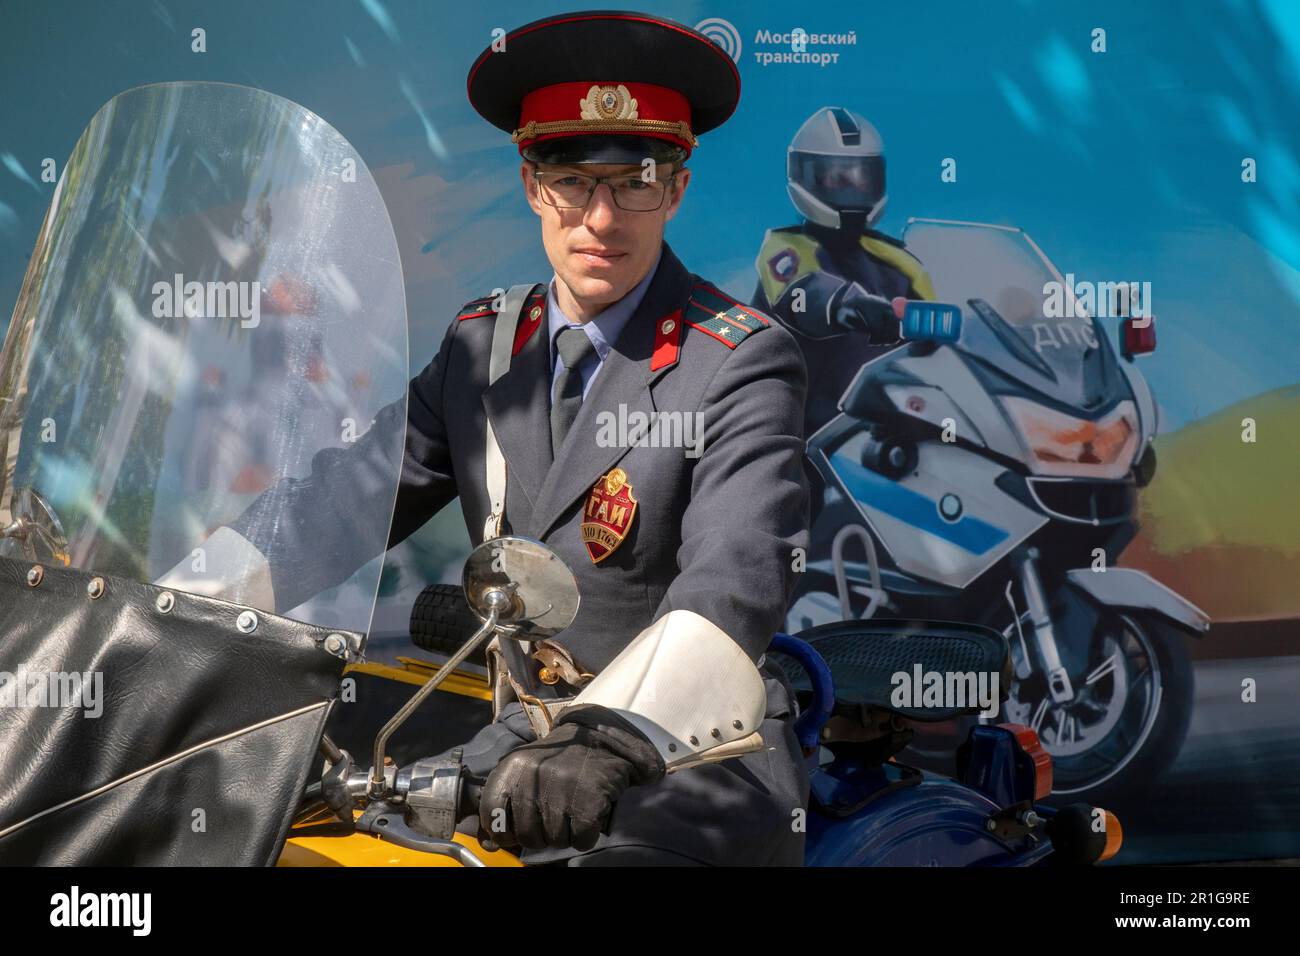 Moscow, Russia. 13th May, 2023. A man in a Soviet uniform of a traffic police officer sits behind the wheel of a Ural motorcycle at tthe Moscow Motorcycle Festival marking the opening of a new motorcycle season in the Muzeon Park of Moscow, Russia Stock Photo